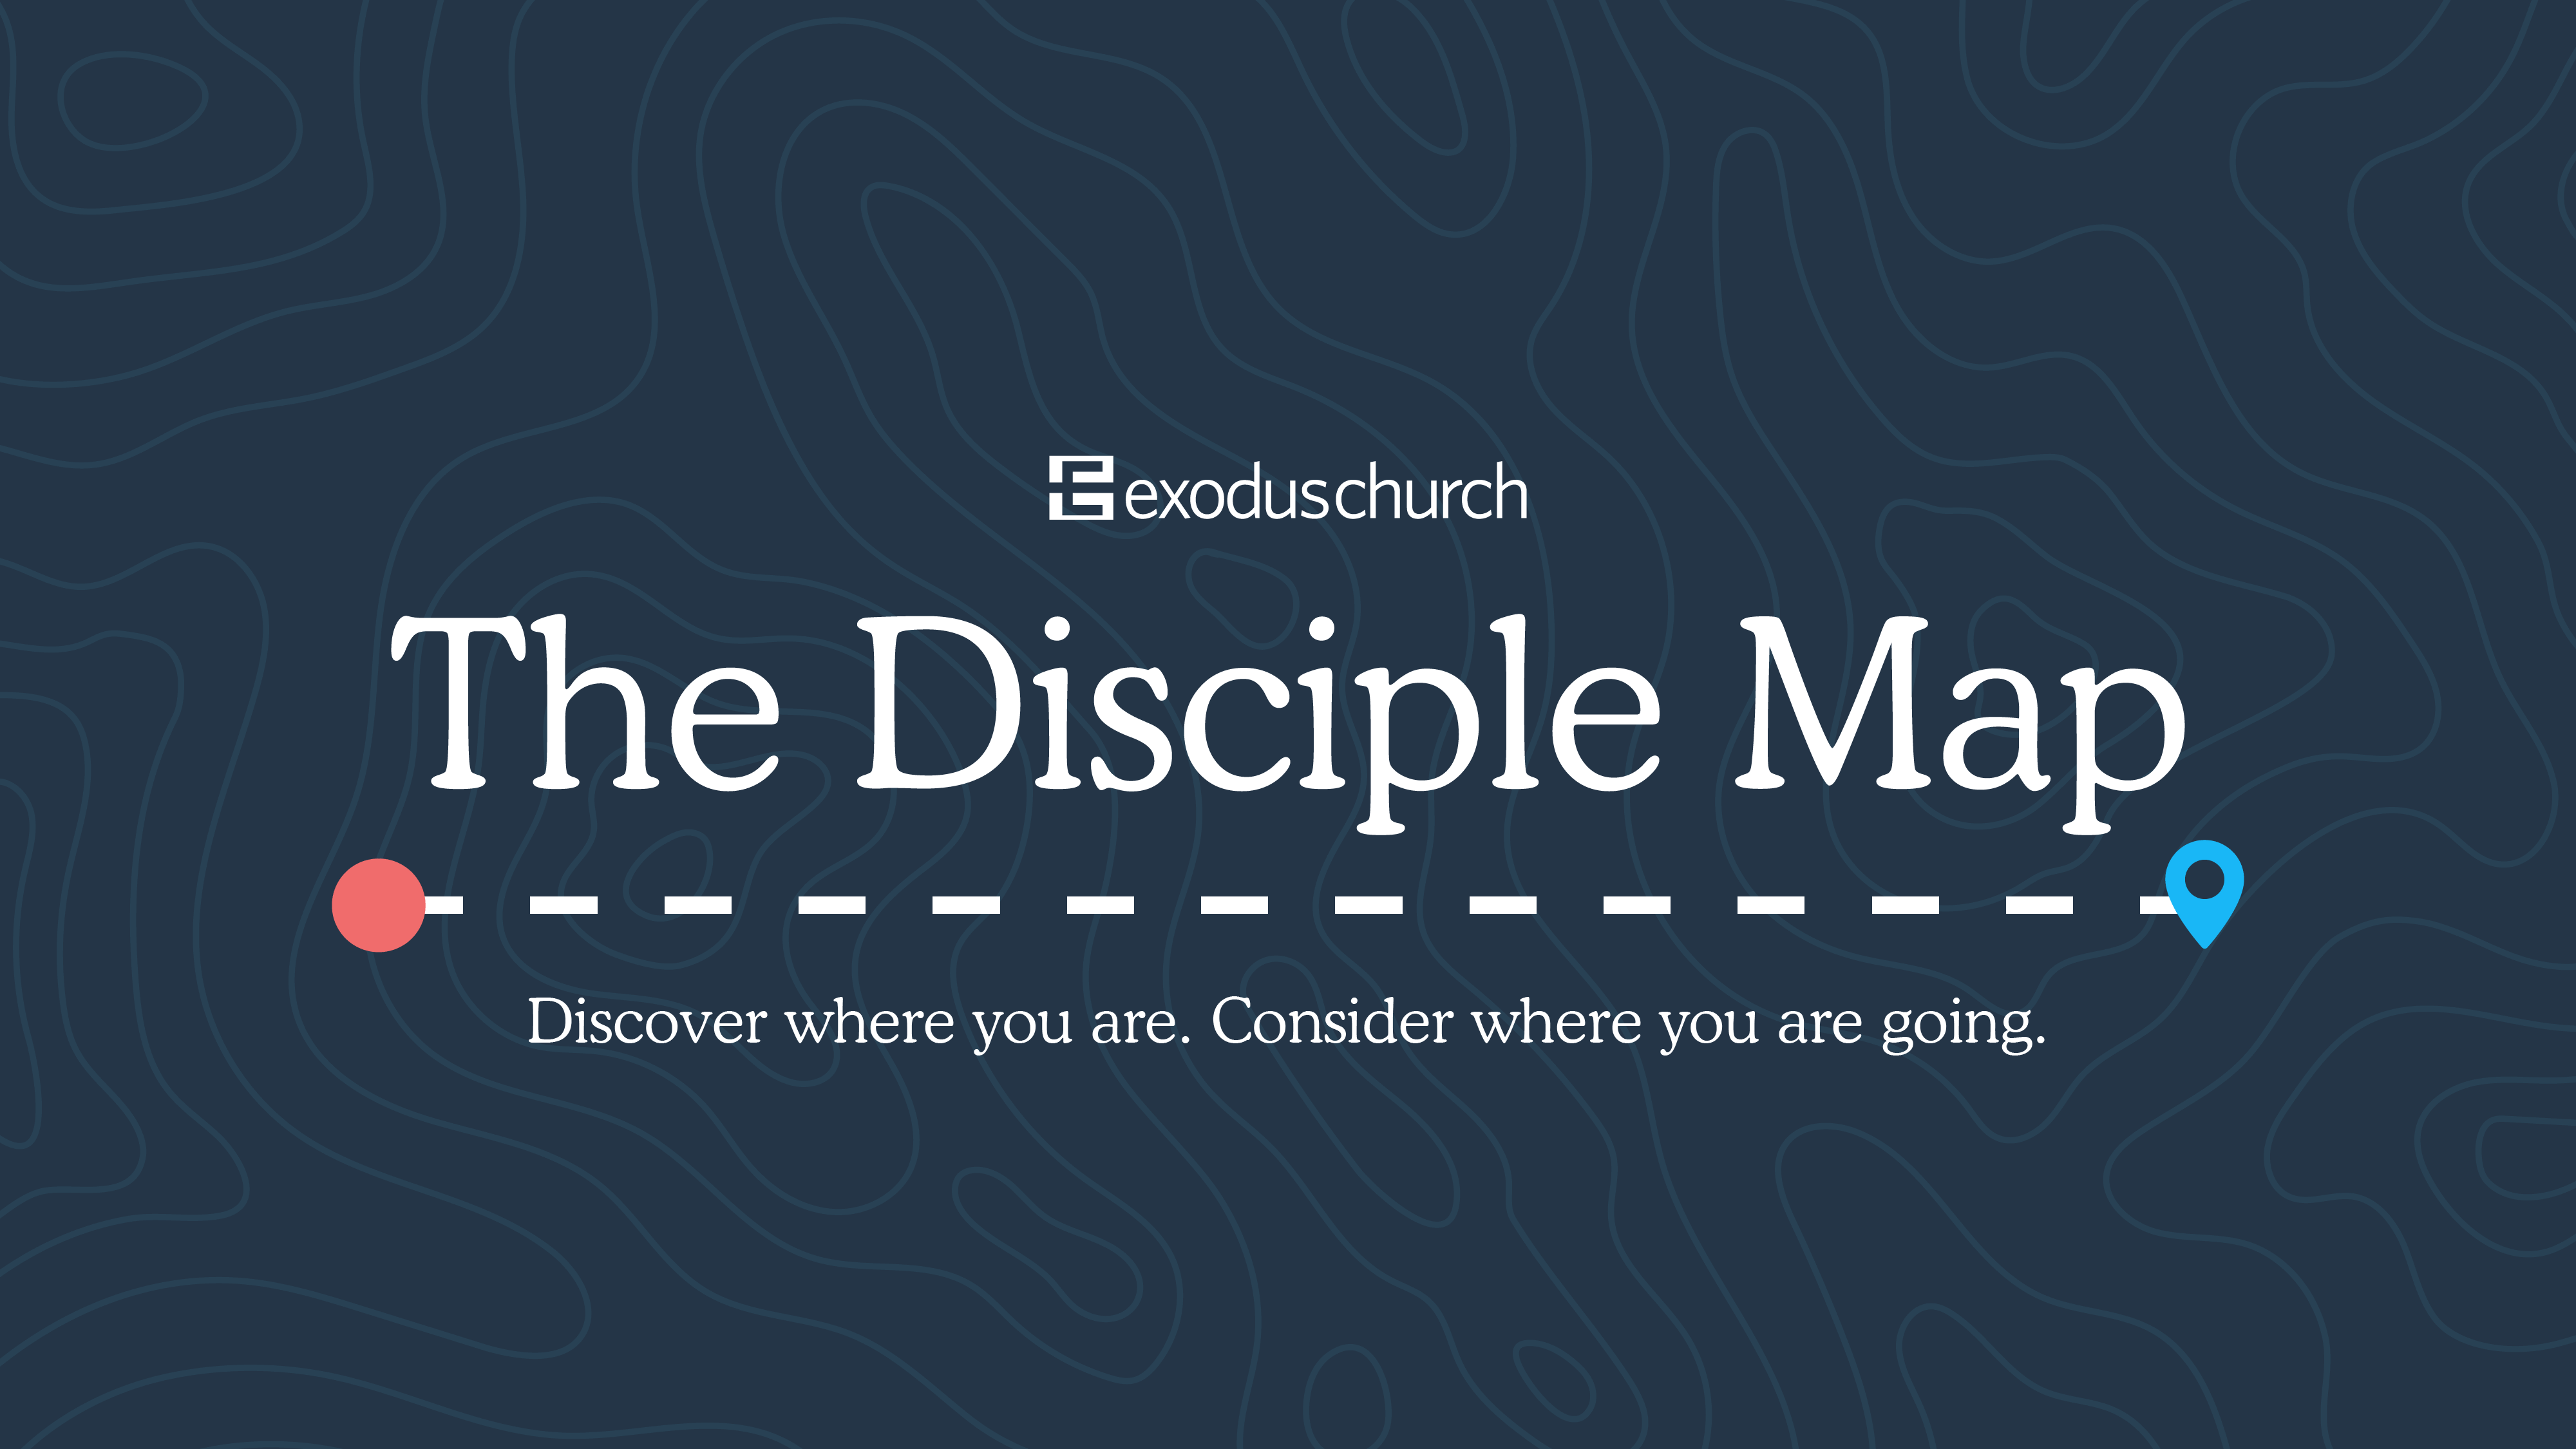 The Disciple Map Launch